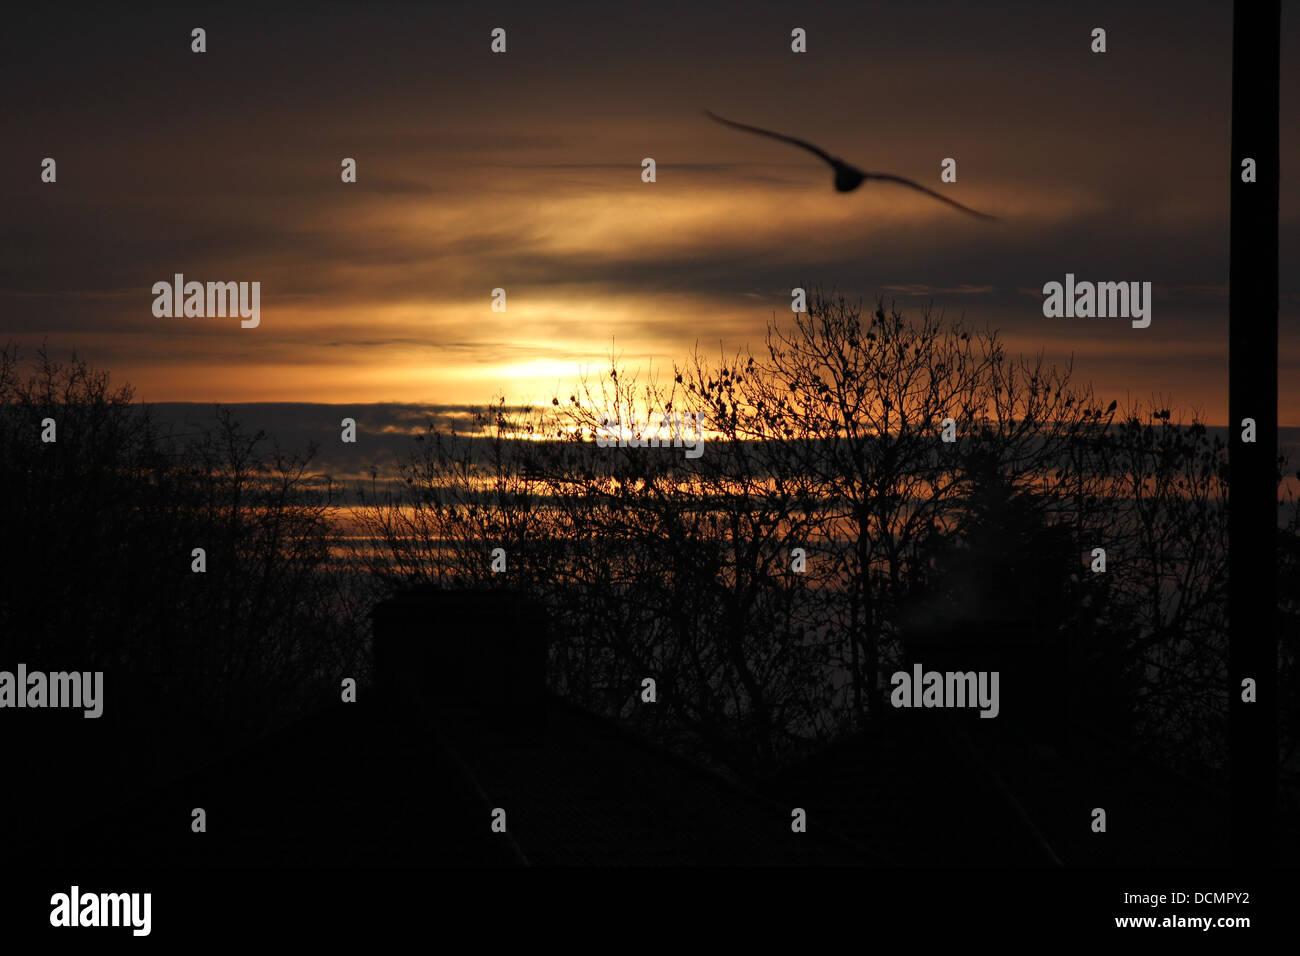 Sunrise emerging from behind clouds over tree-tops in the background, framing a seagull taking flight in the foreground Stock Photo